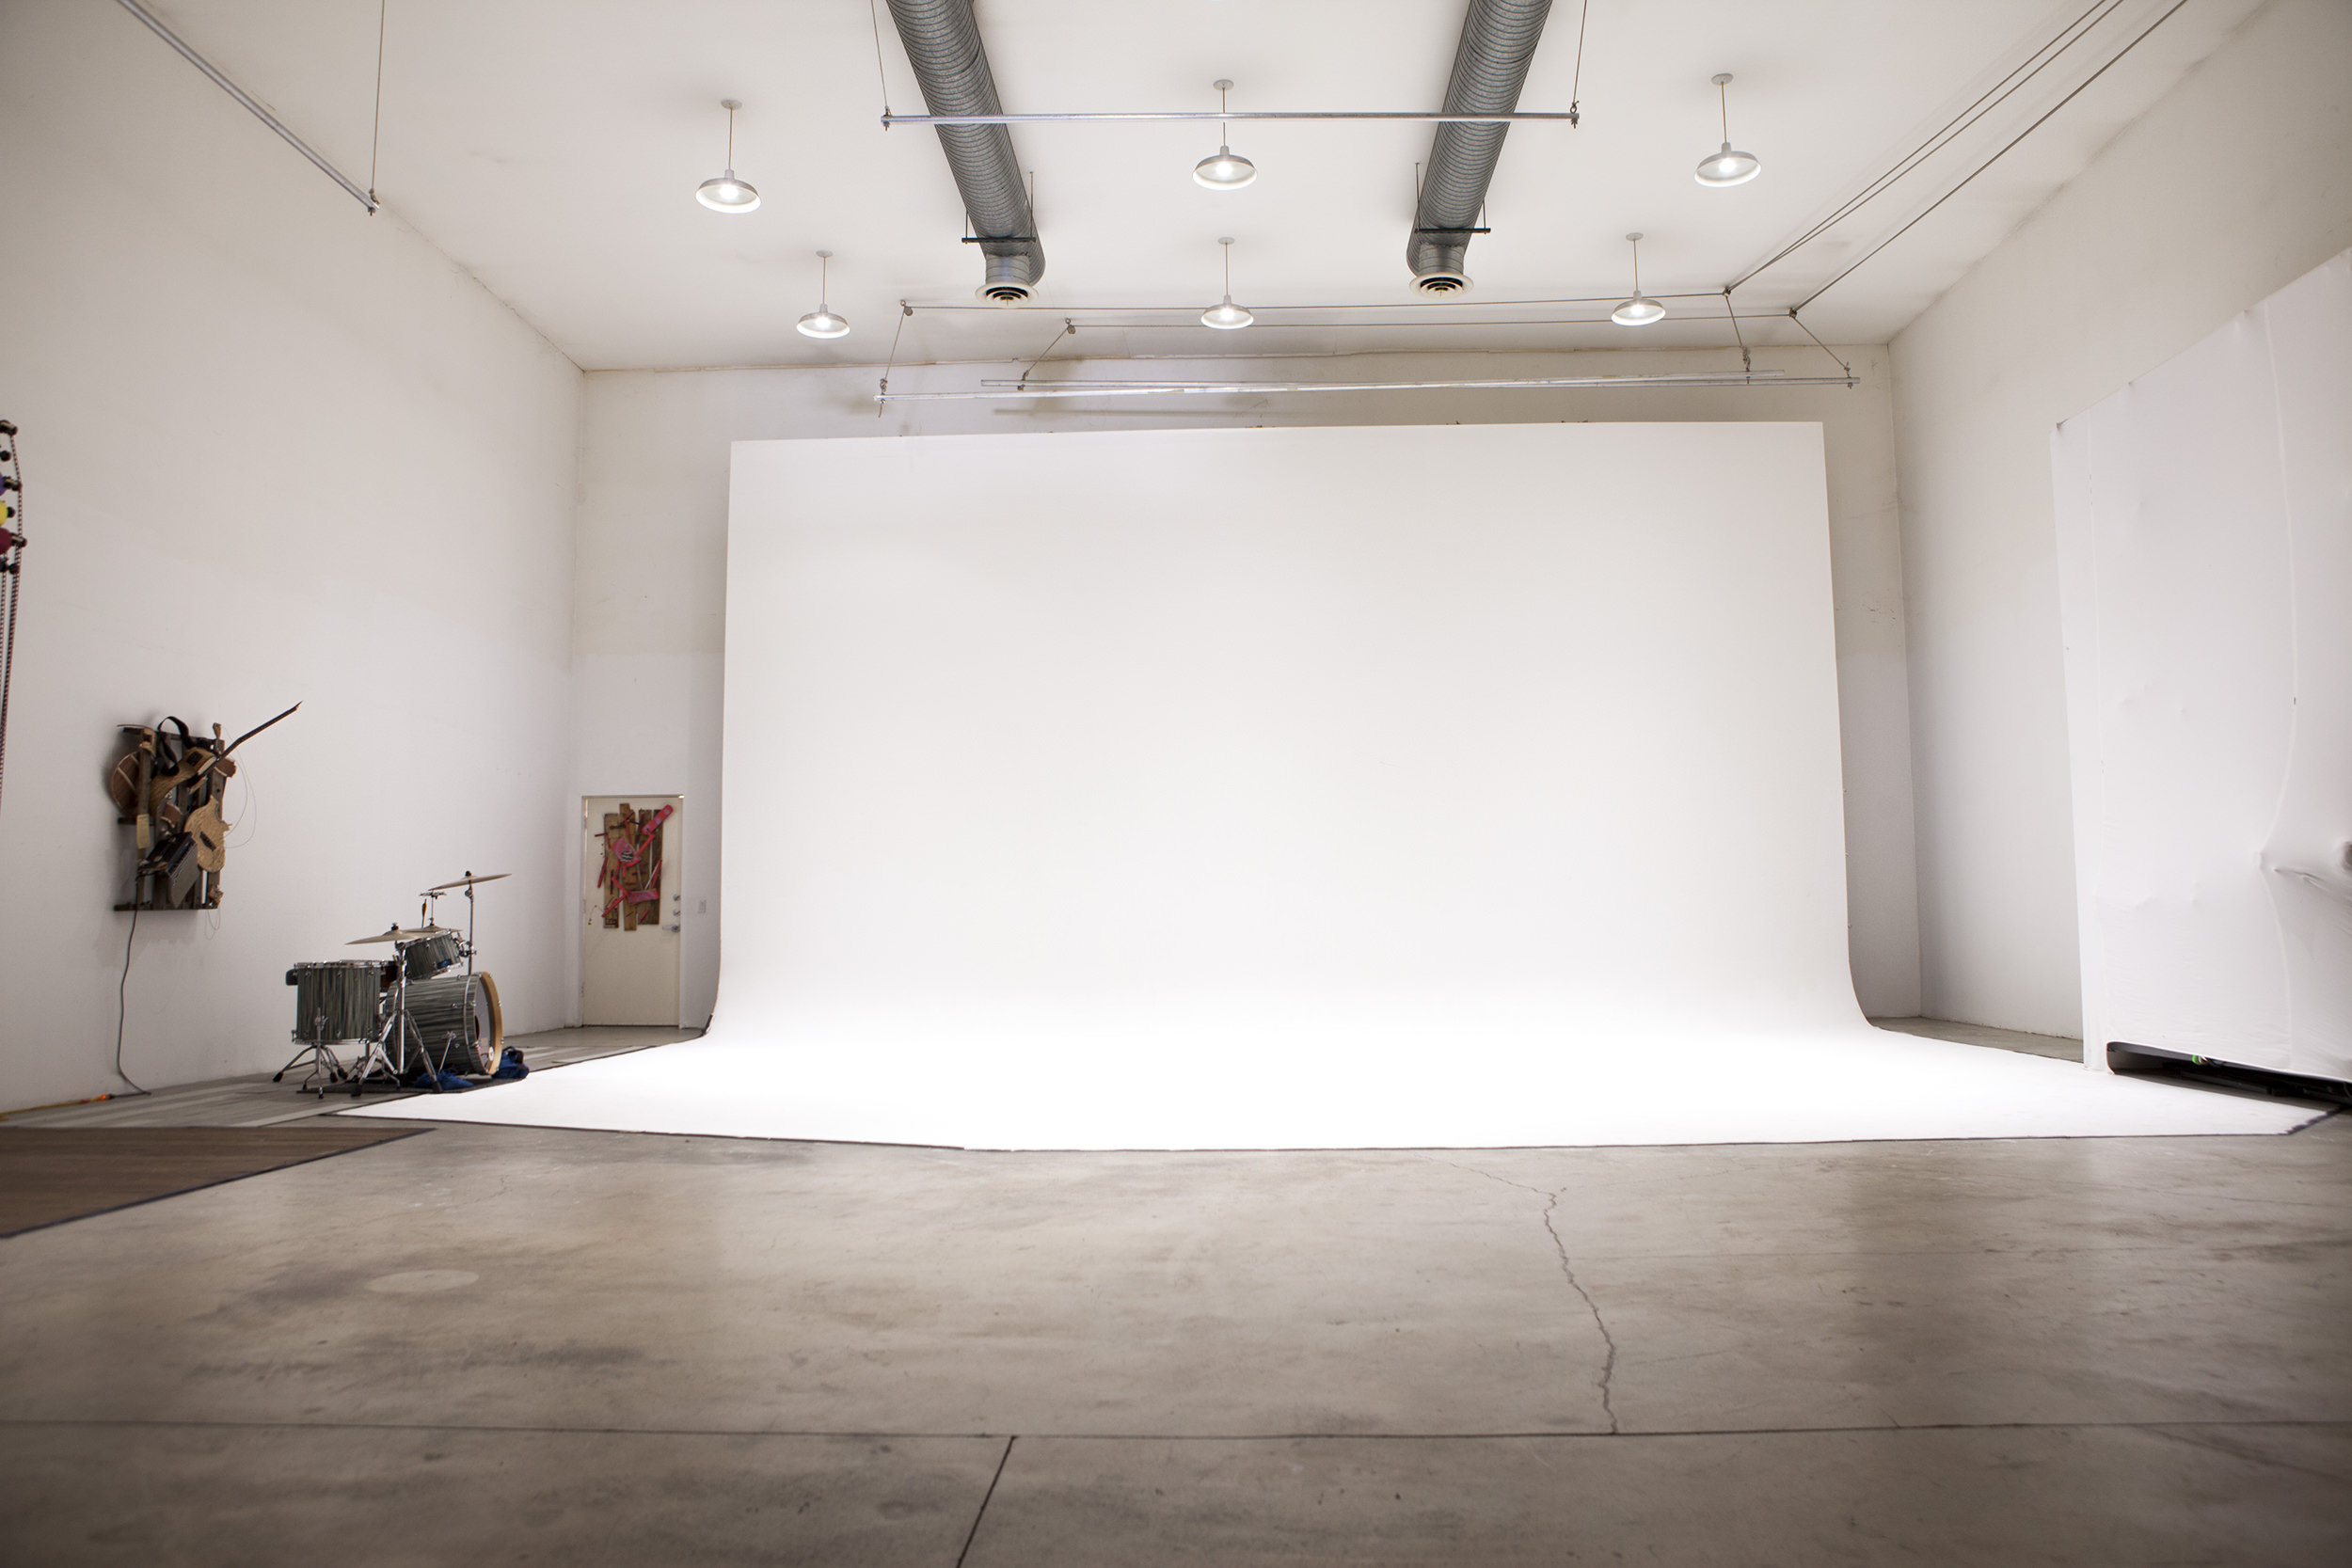  40 X 80 ft. shooting space with a 40 ft. cyclorama and 22 ft. ceilings.   Cyclorama Power:  360 Amps distributed to SIX 60 Amp Bates Outlets. 